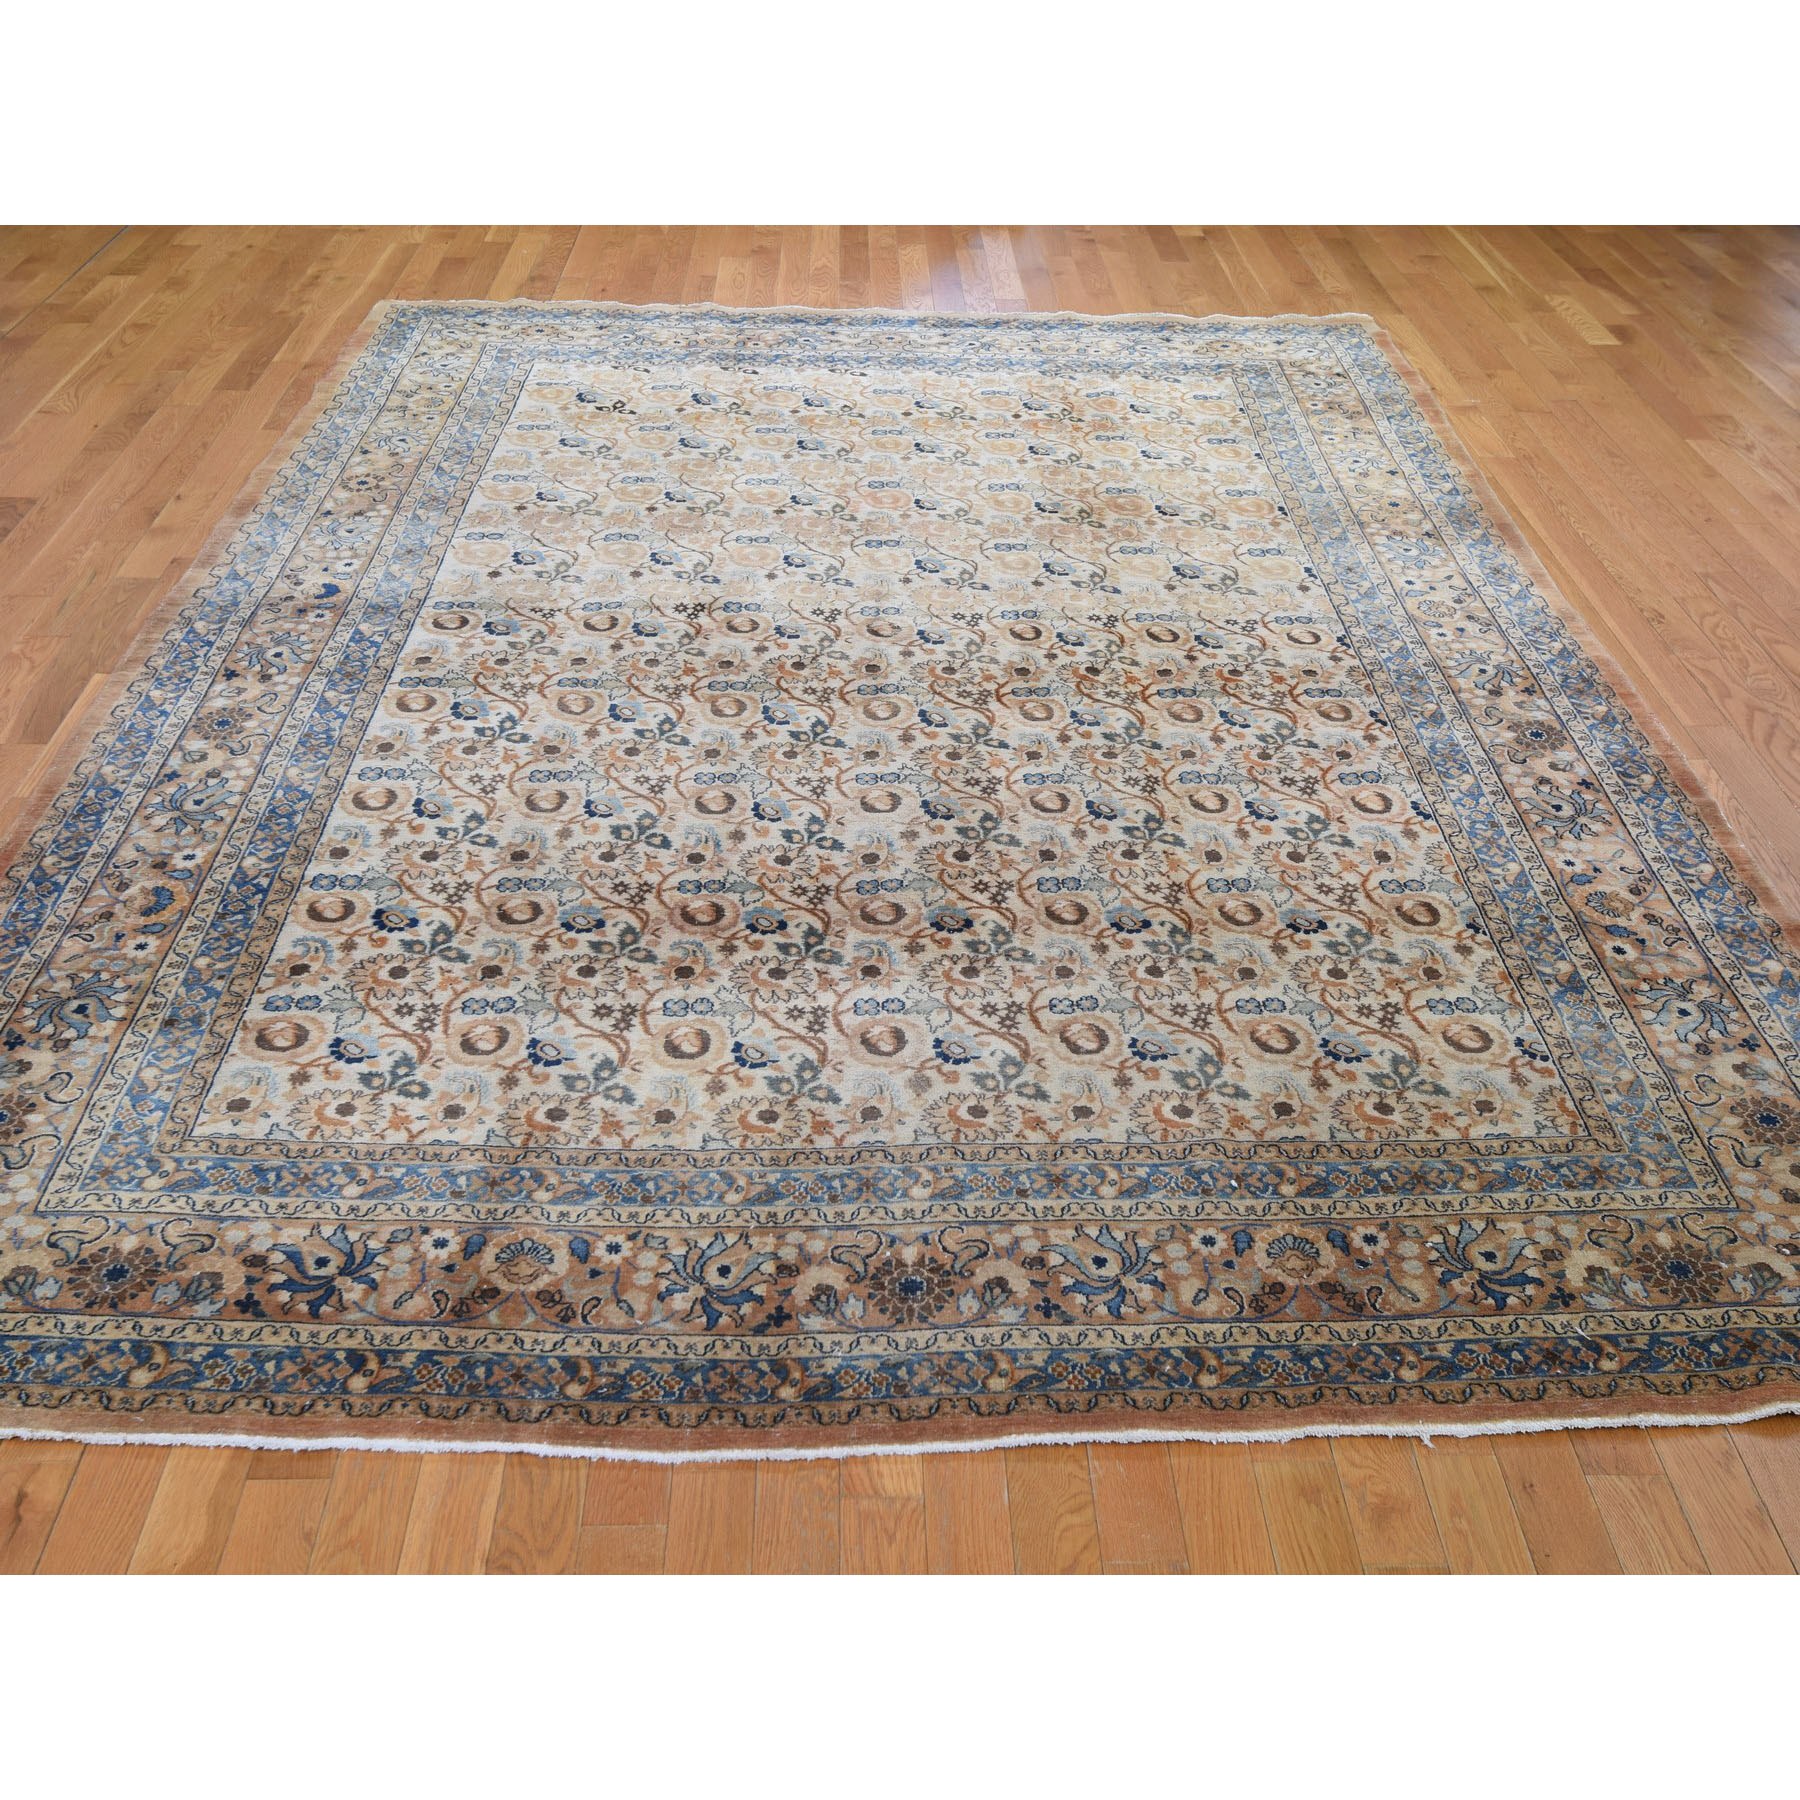 8-6 x12- Antique Persian Mashad With Abrush Full Pile Hand Knotted Oriental Rug 